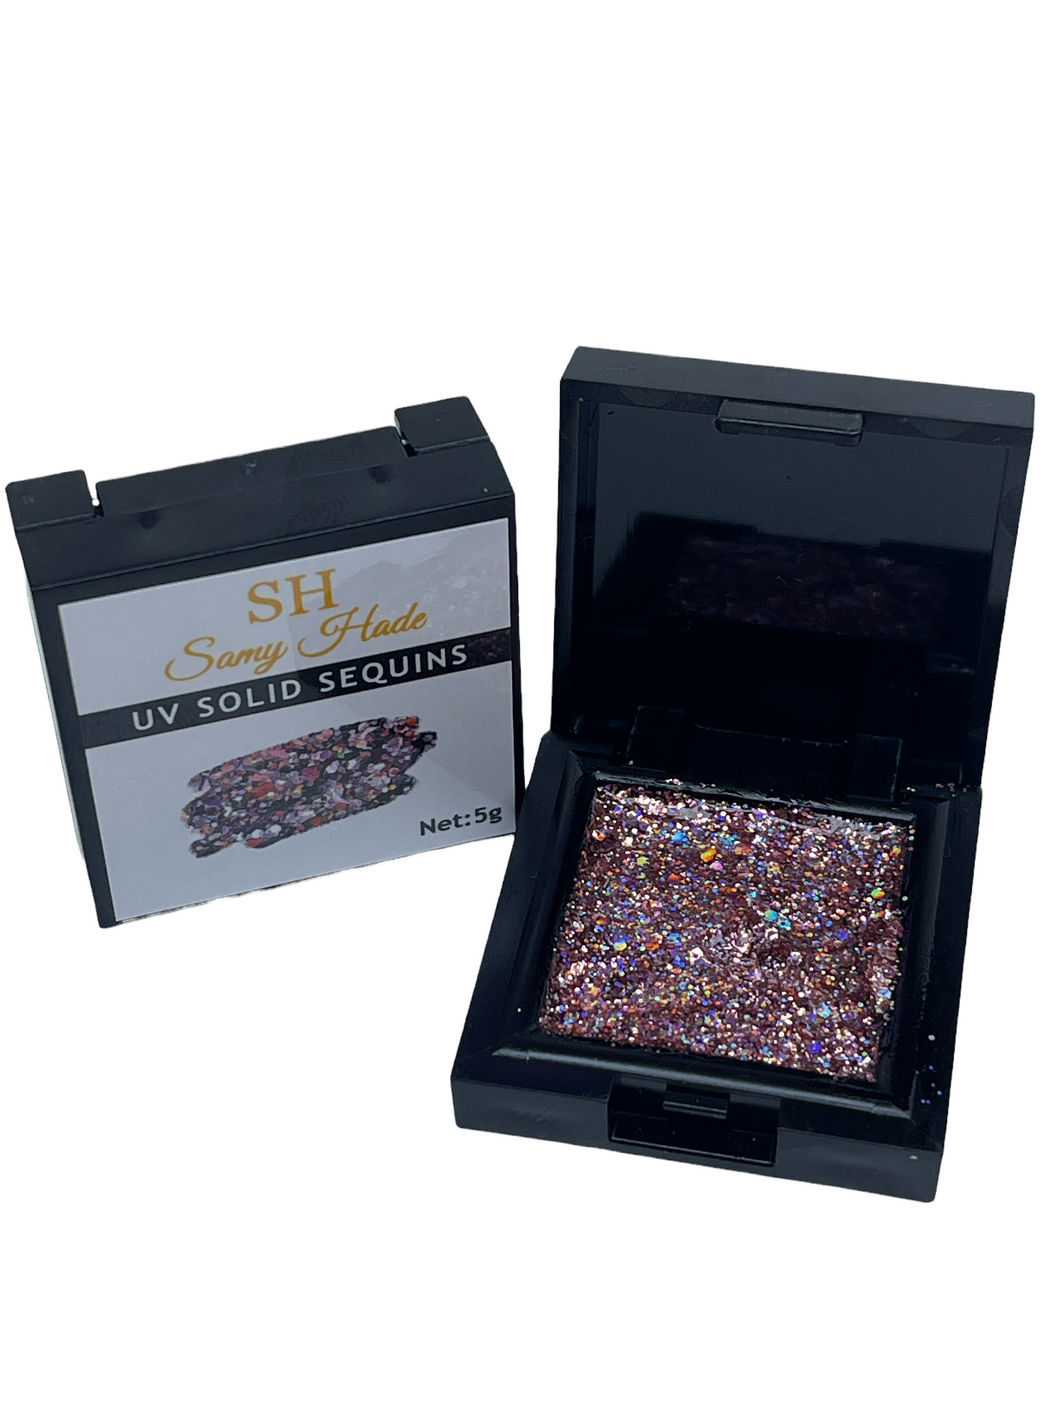 UV solid sequins #5